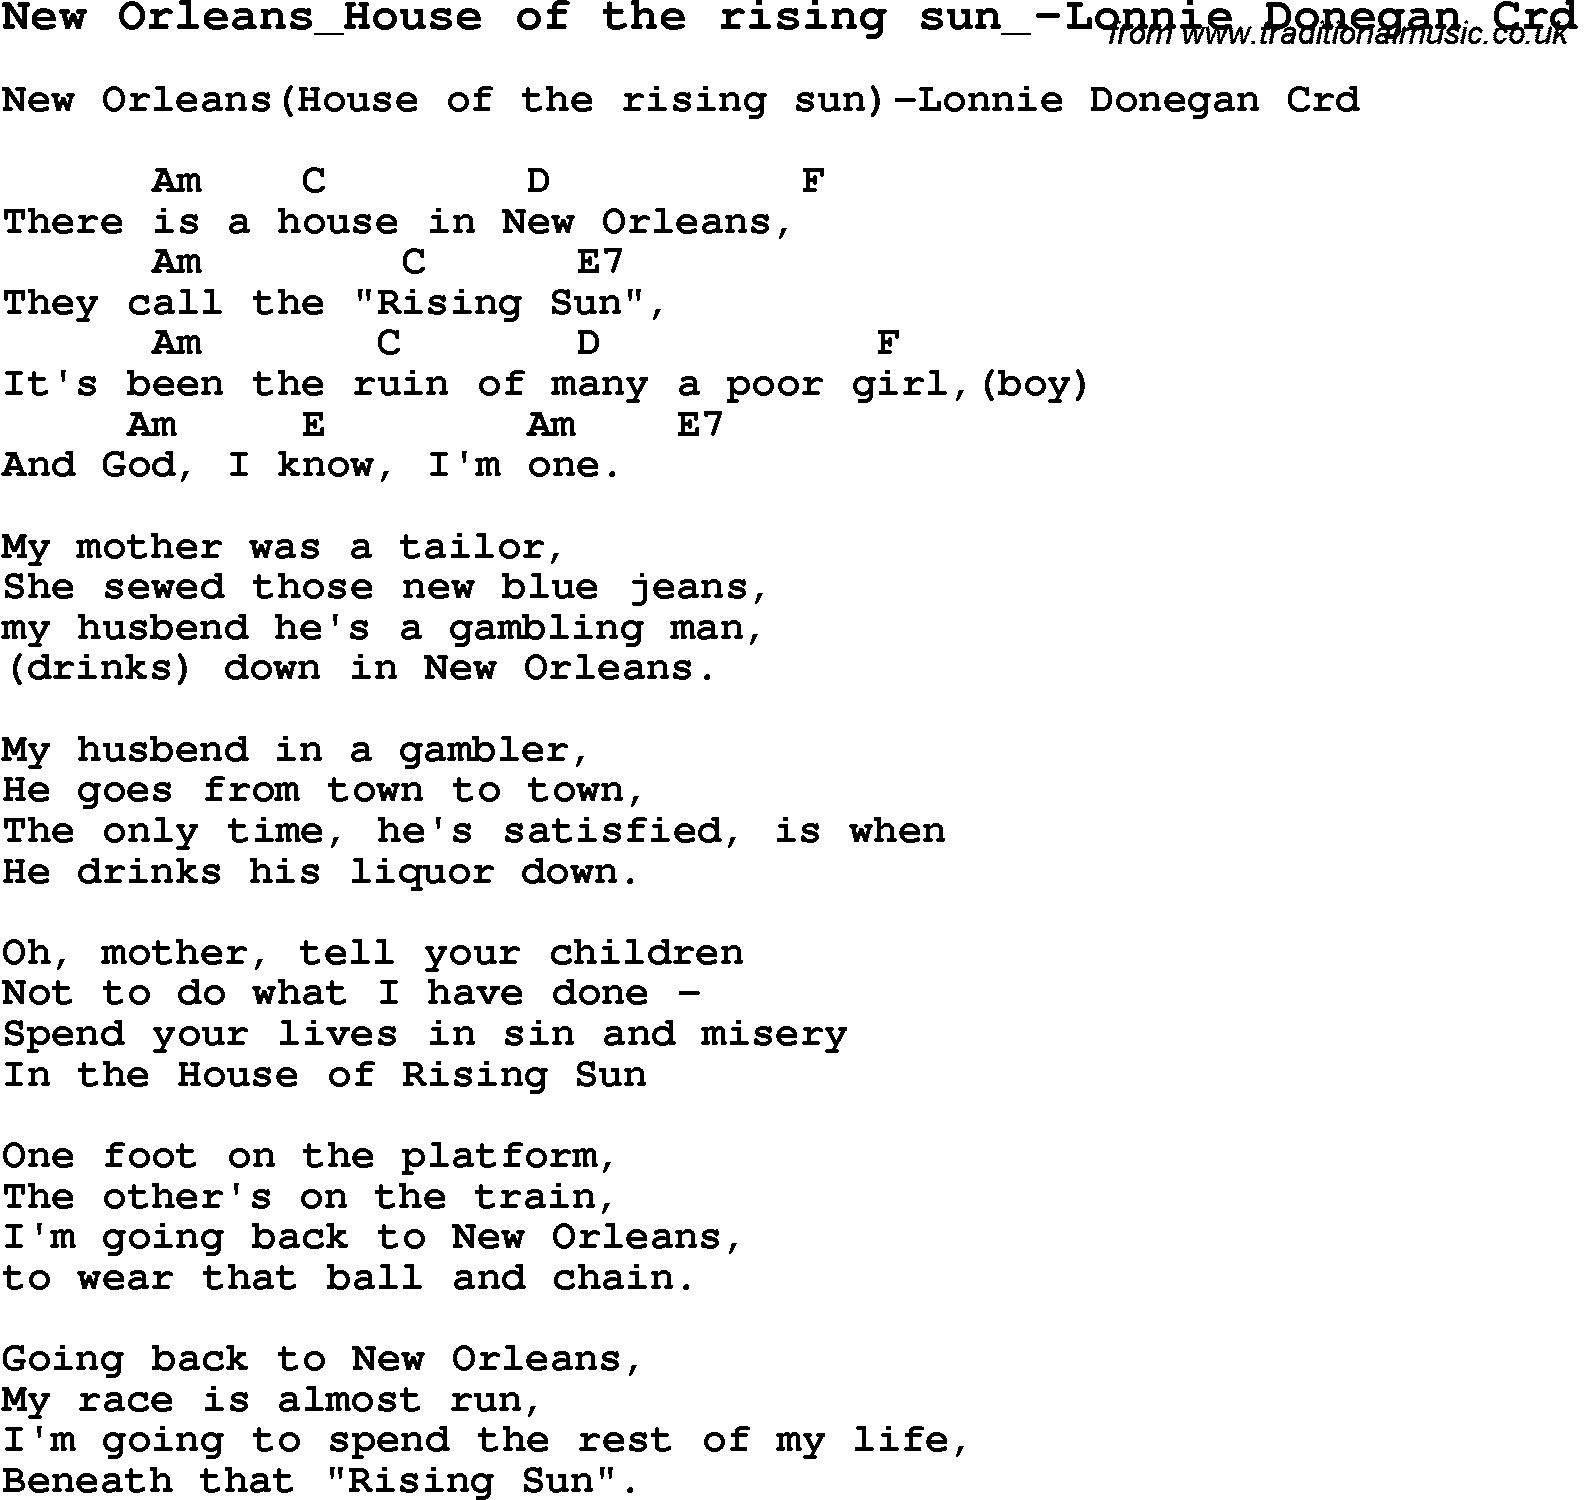 Skiffle Lyrics For New Orleans House Of The Rising Sun Lonnie Donegan With Chords For Mandolin Ukulele Guitar Banjo Etc,Modern Arts And Crafts Living Room